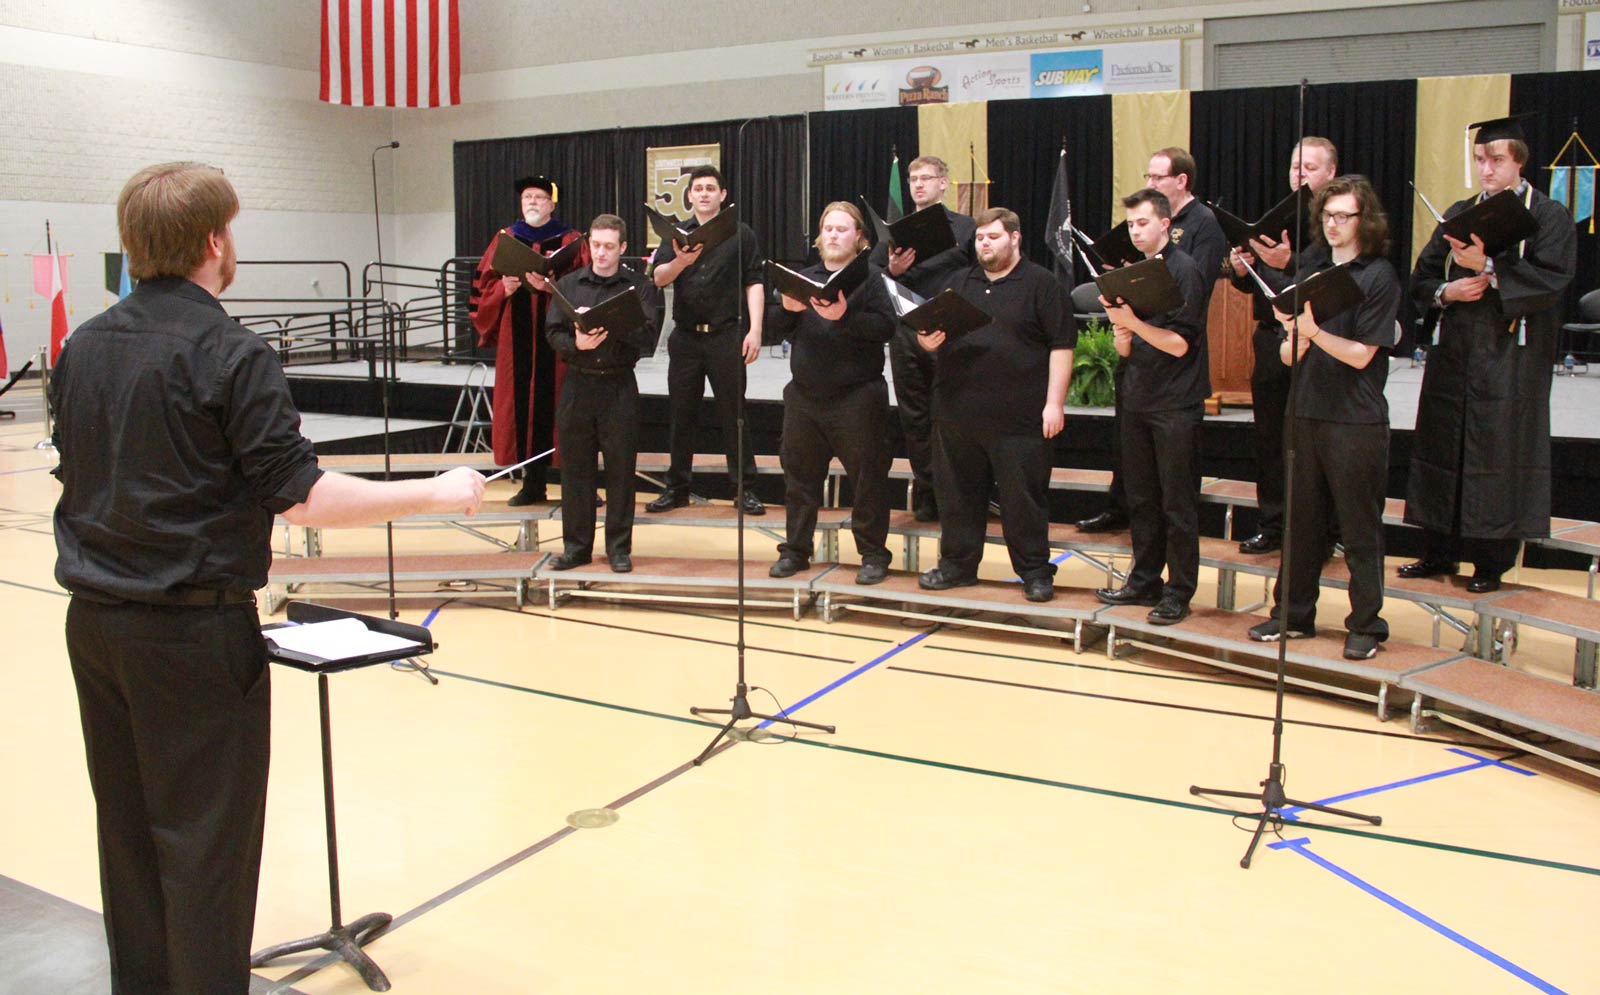 SMSU Leading the Way on Gender-Inclusive Vocal Ensembles